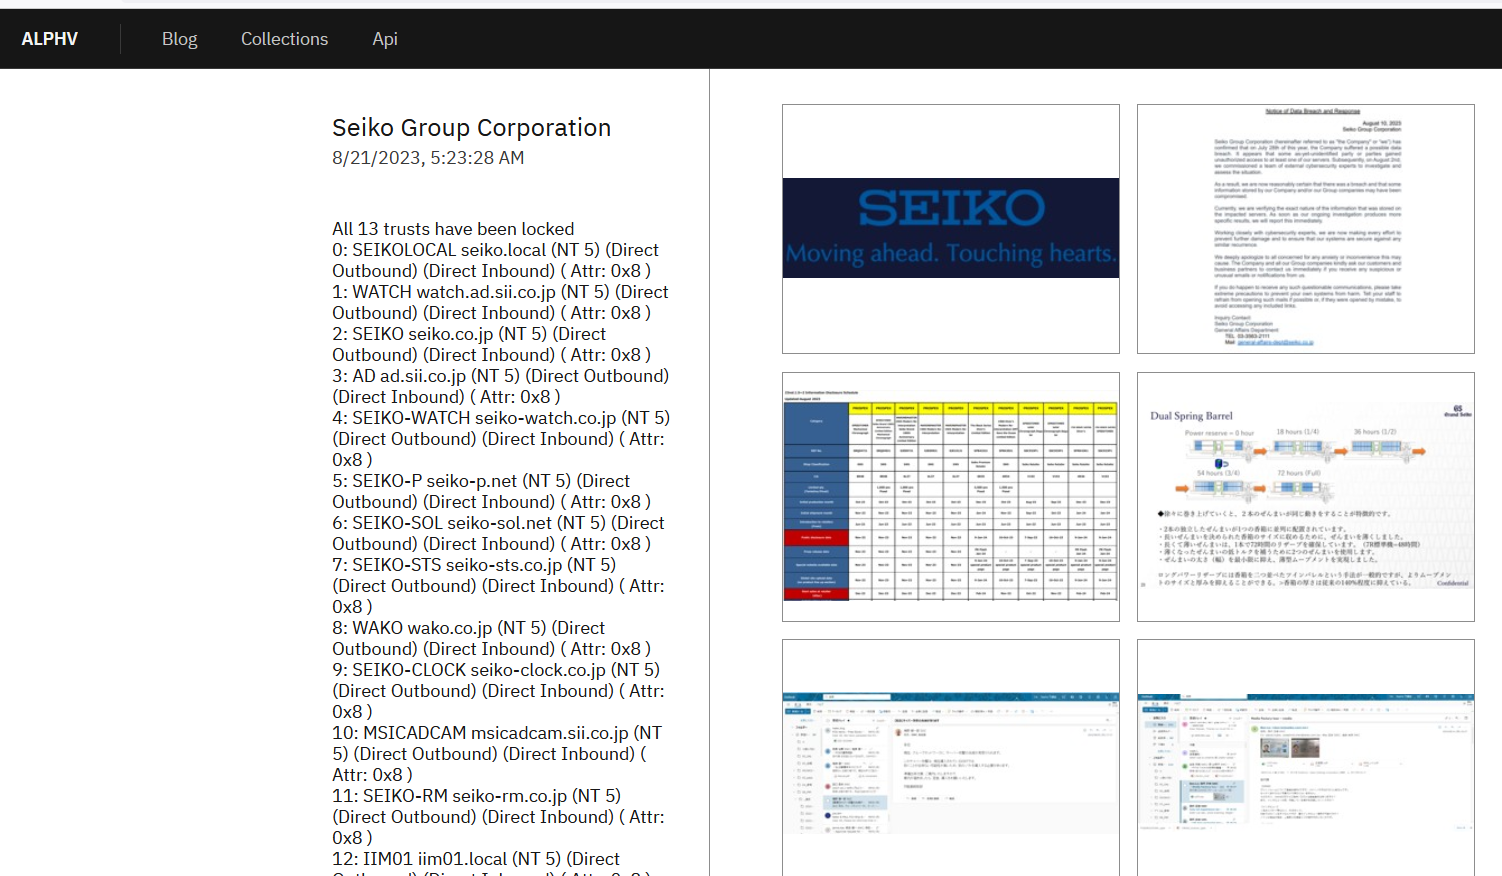 BlackCat ransomware group claims the hack of Seiko network